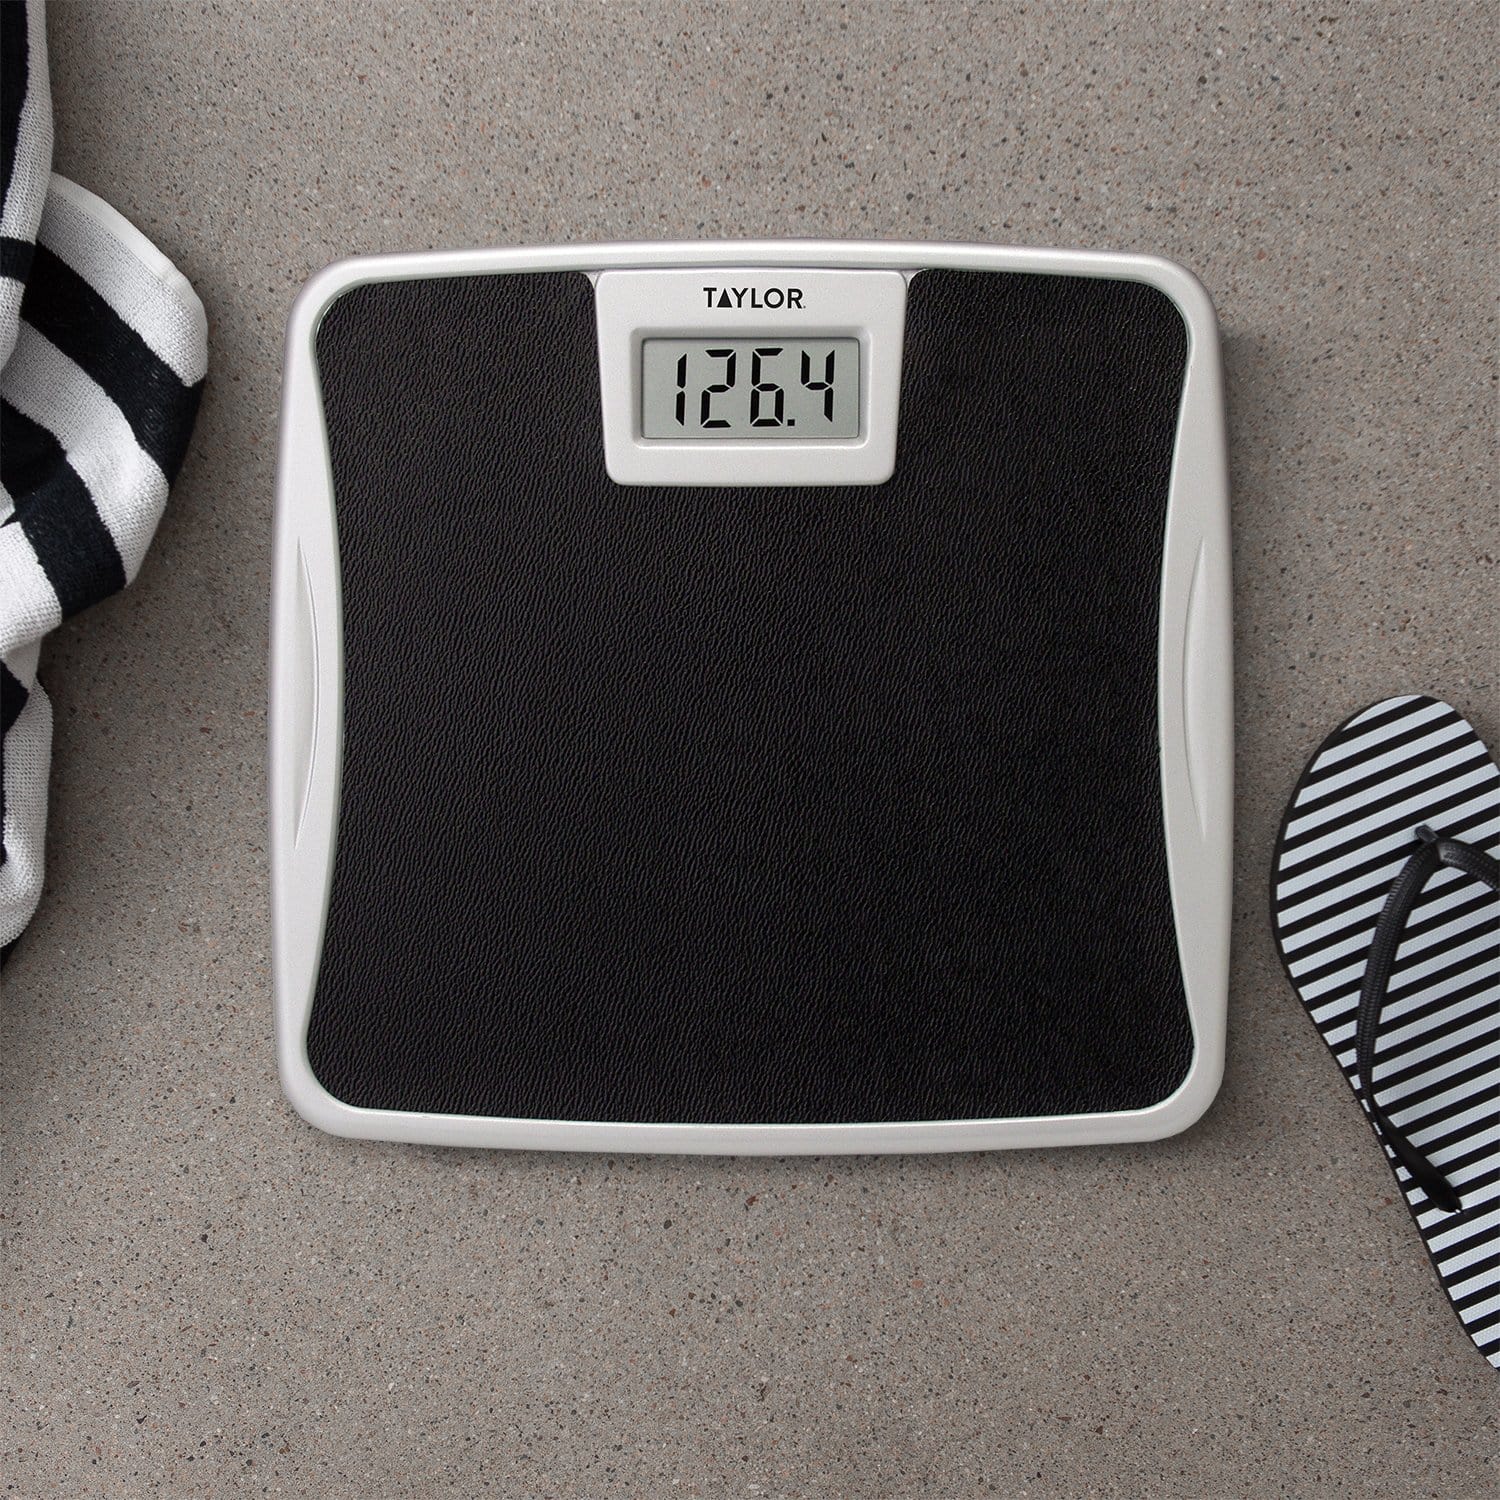 New and used Bathroom Scales for sale